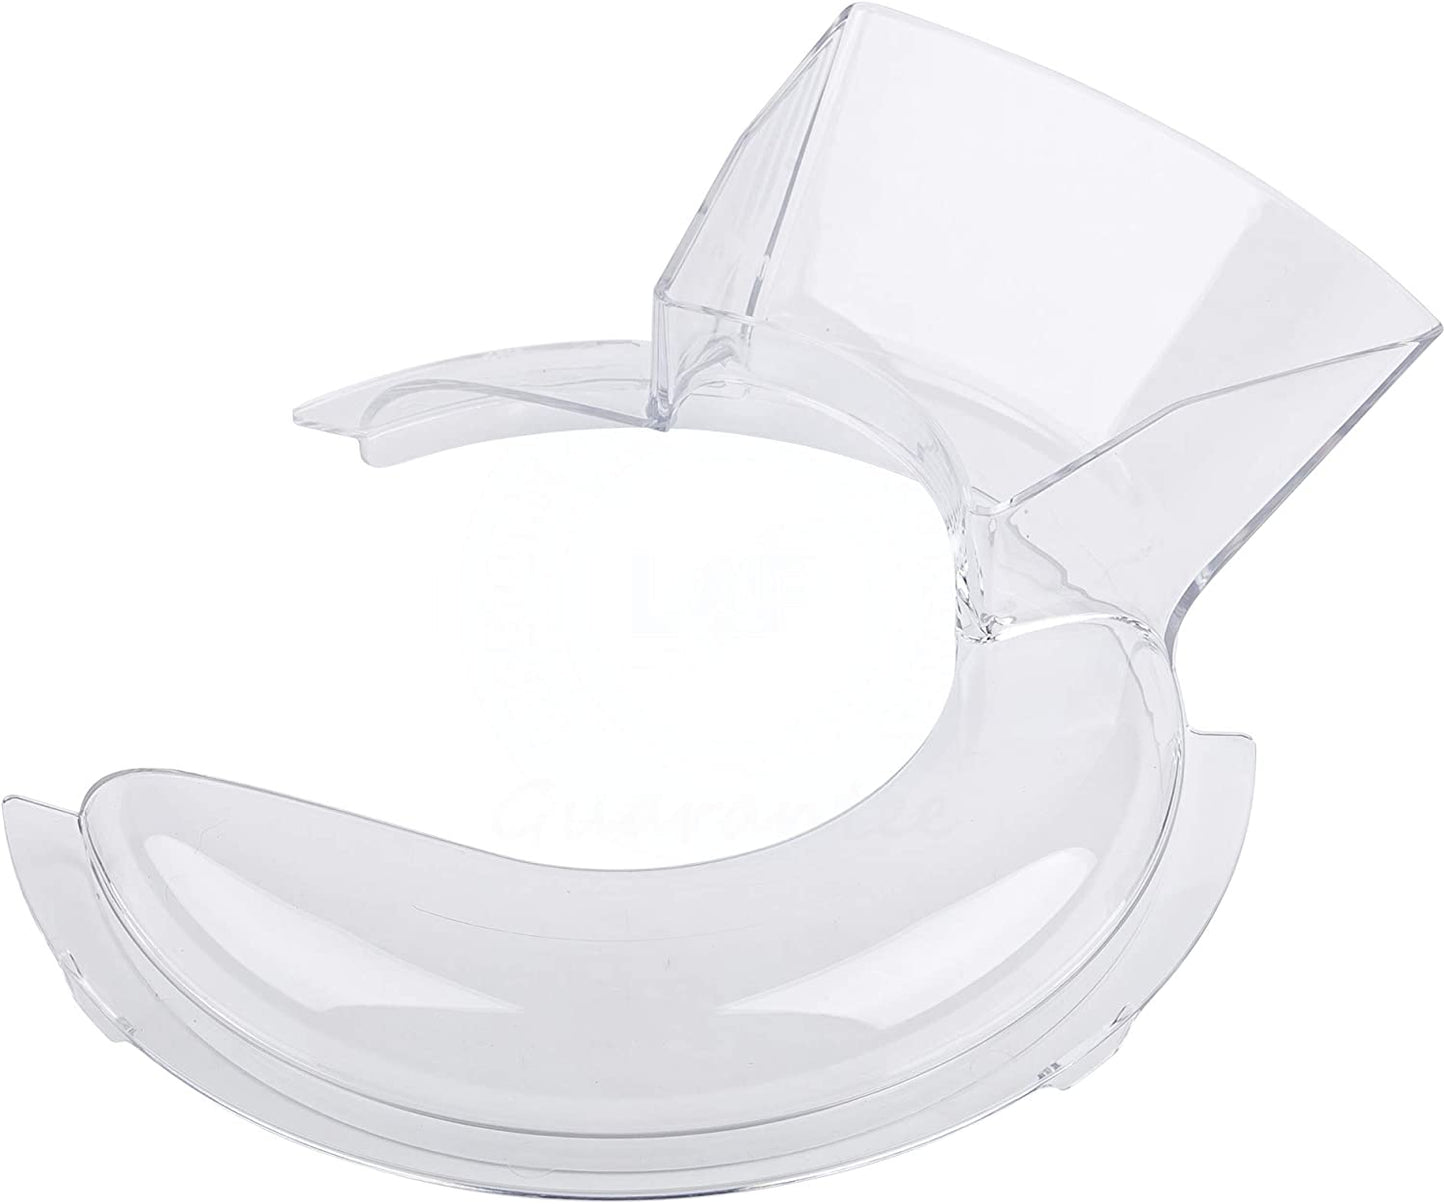 W10616906 Pouring Shield Compatible with KitchenAid Mixer - KN1PS